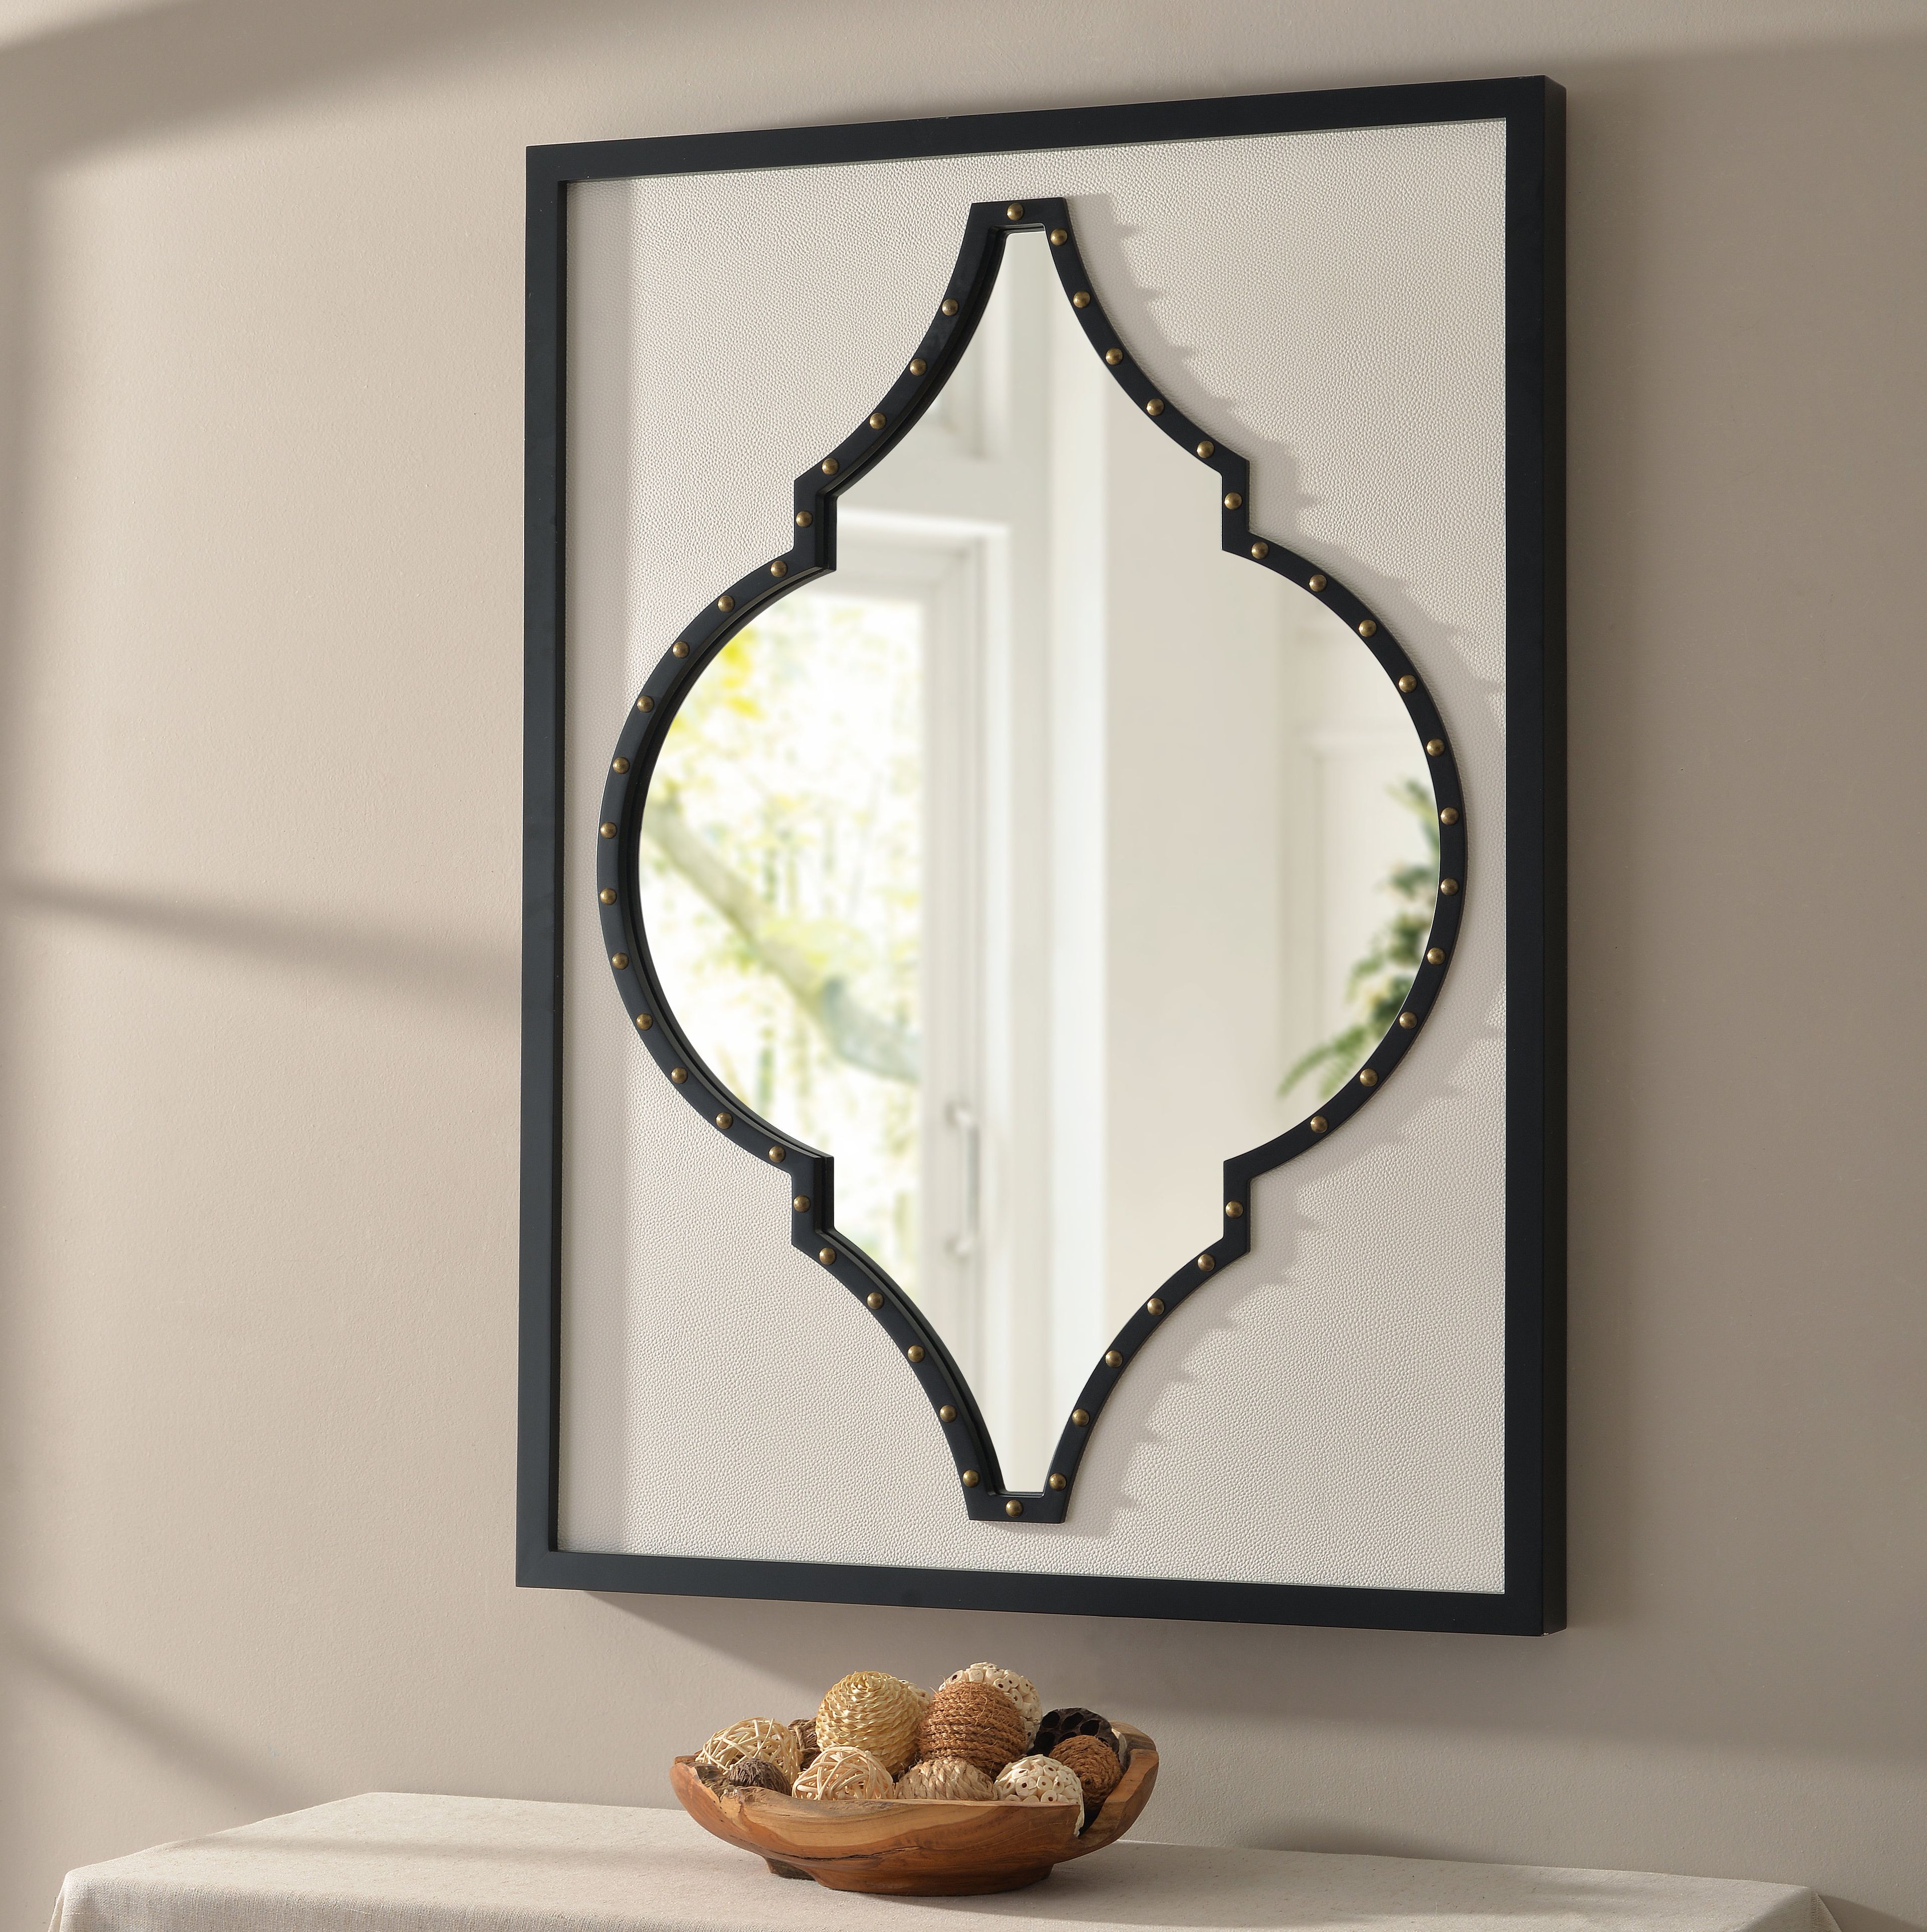 2019 Estefania Frameless Wall Mirrors Throughout Woll Accent Mirror (View 19 of 20)